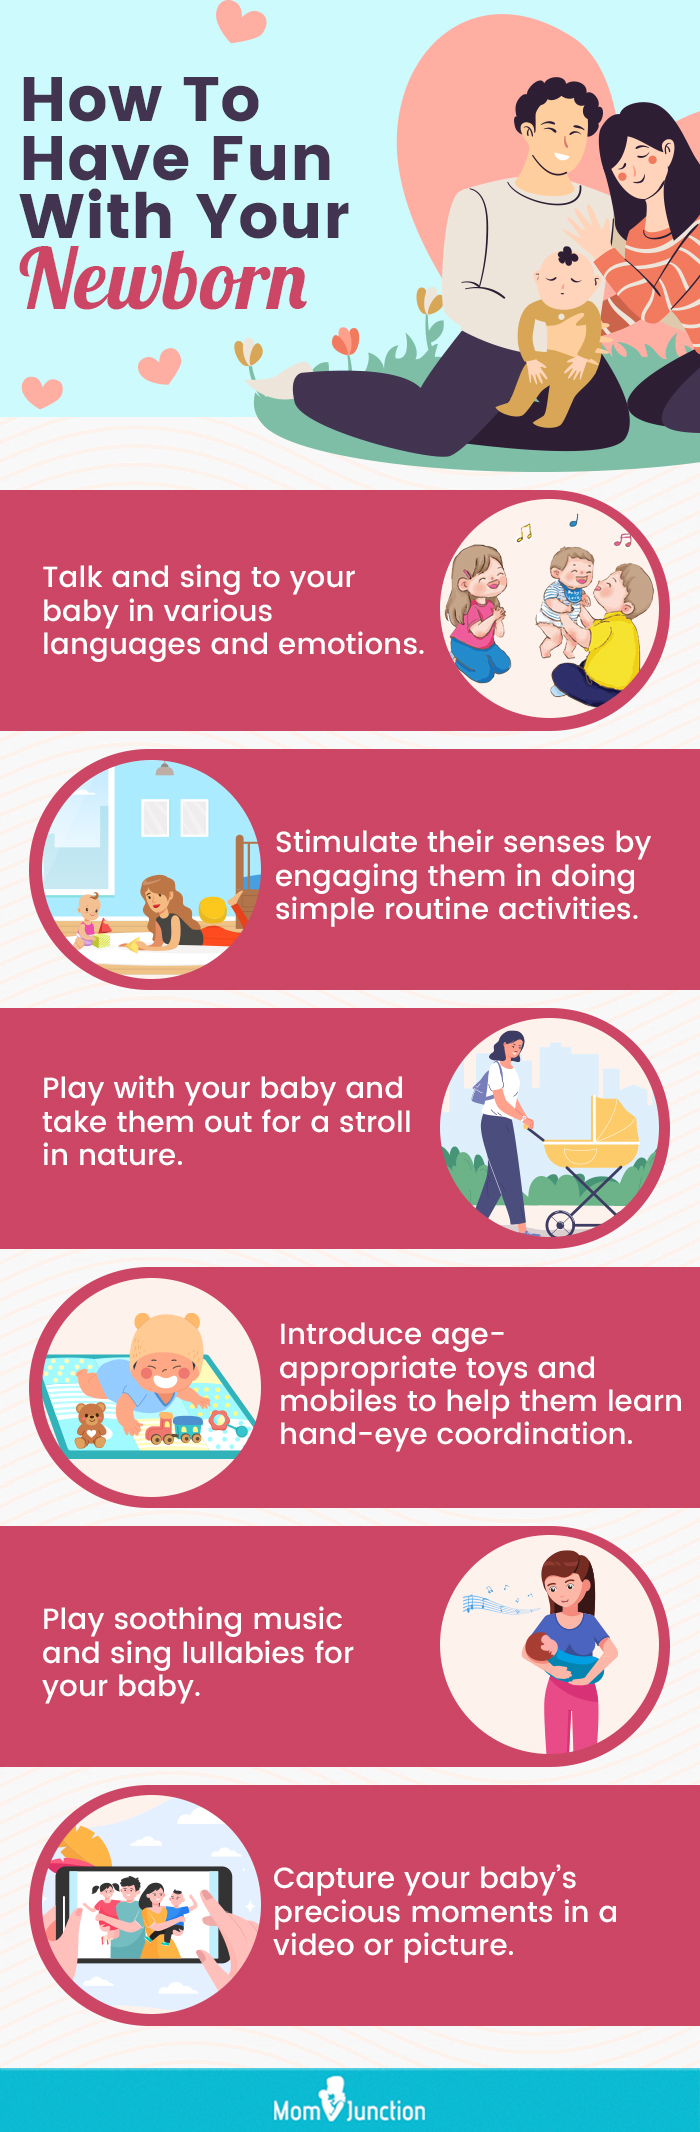 https://www.momjunction.com/wp-content/uploads/2014/06/Infographic-Things-To-Do-With-Your-Newborn-Baby.jpg